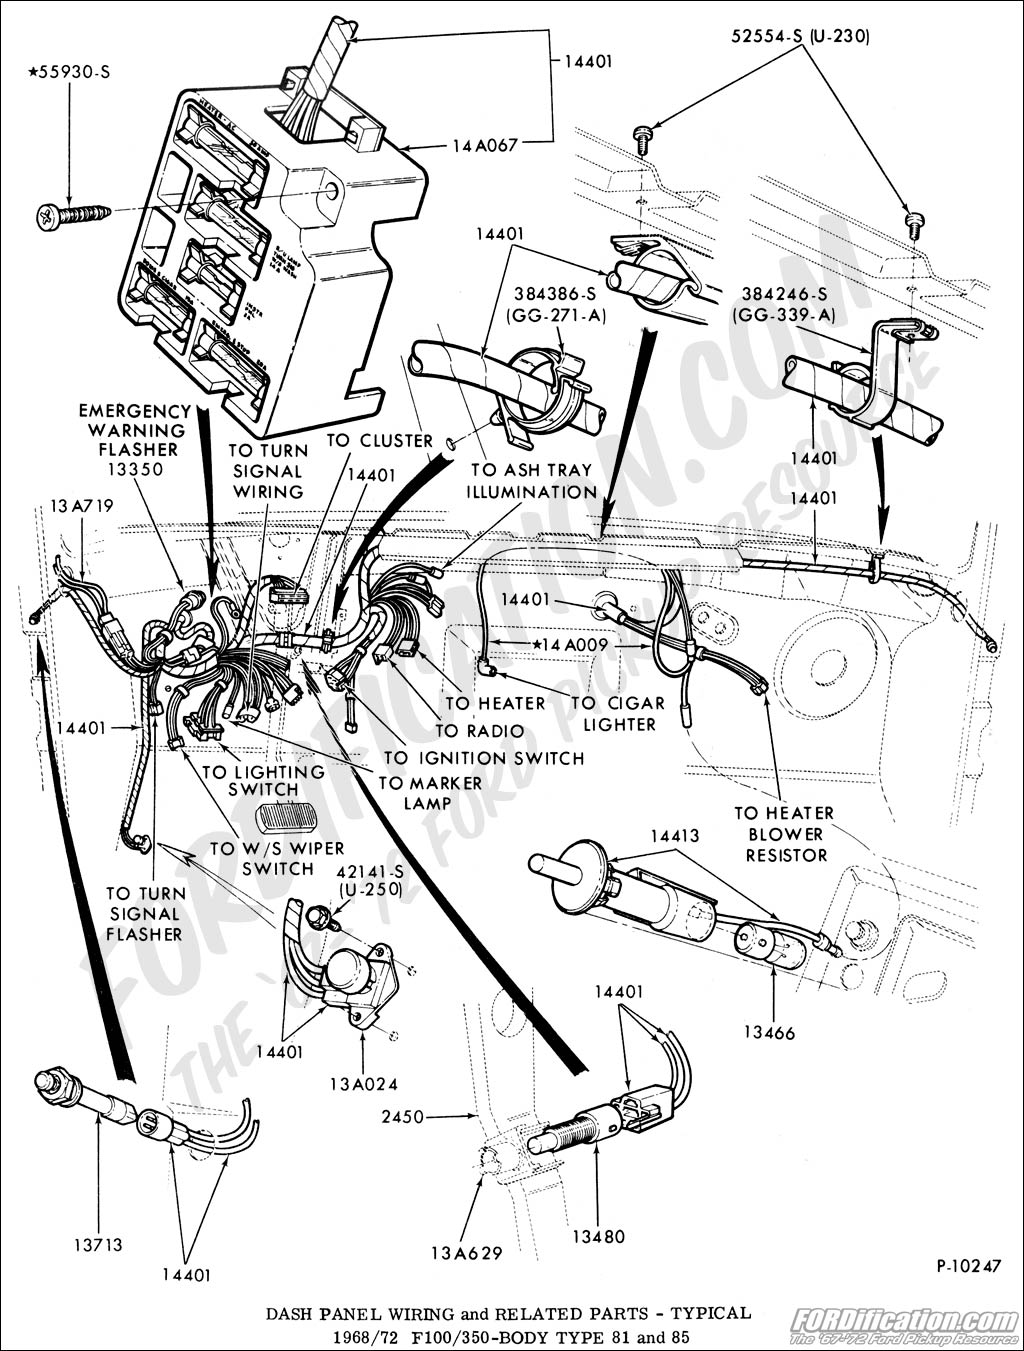 Instrument Cluster 1966 Mustang Wiring Diagram from www.fordification.com